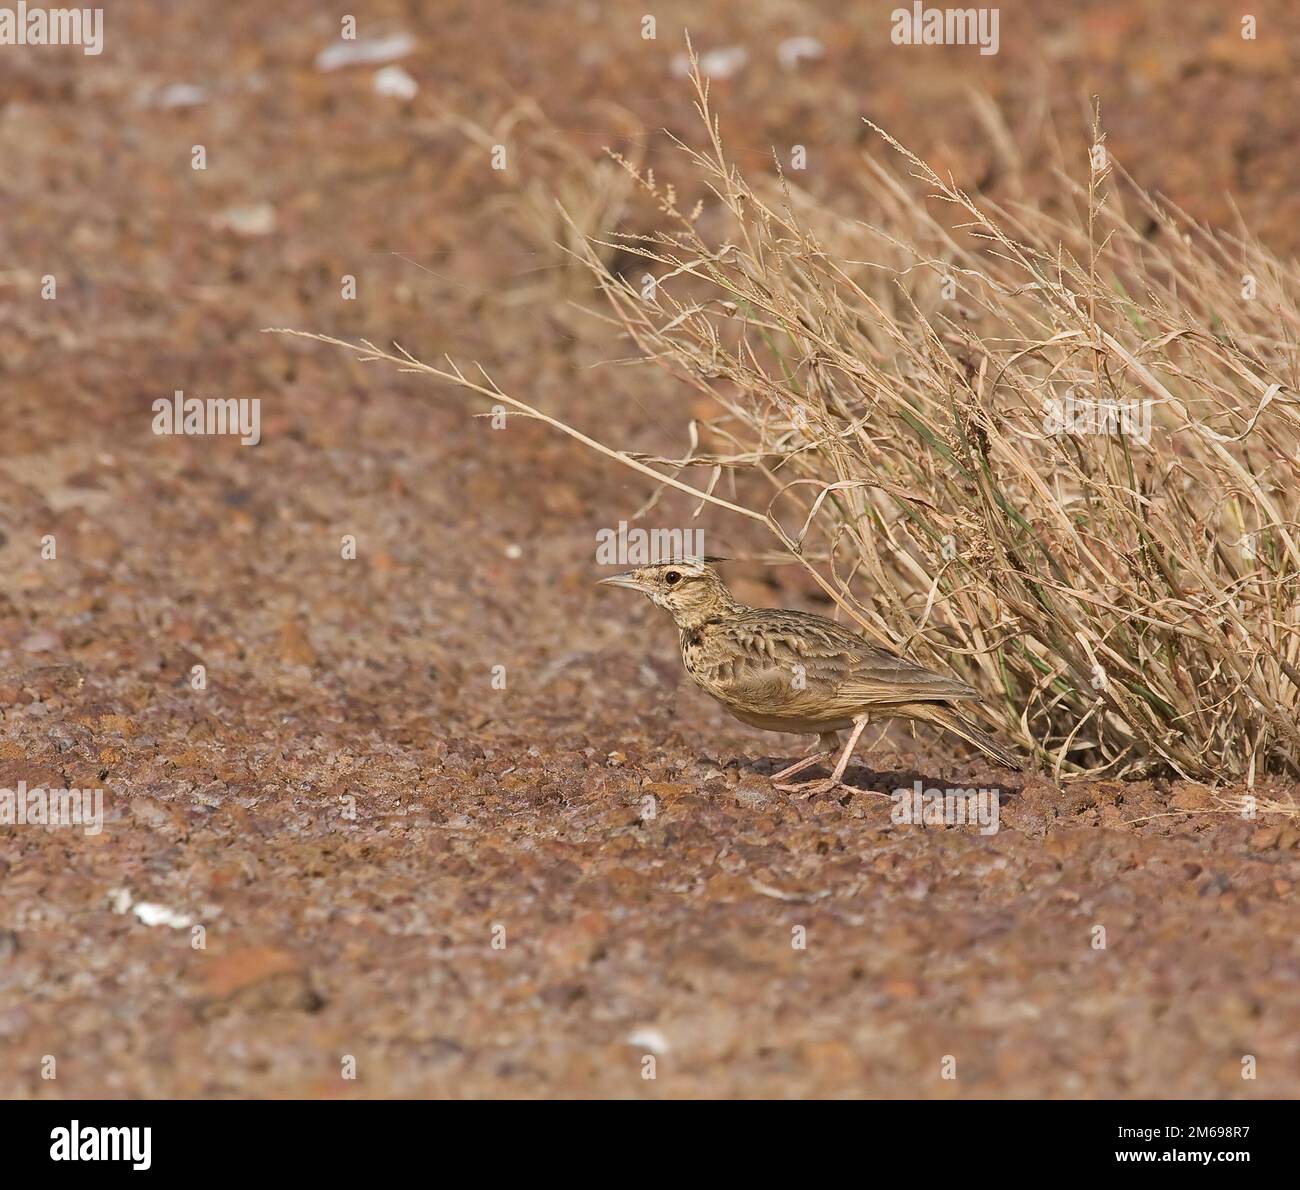 Lark crested in Gambia Foto Stock